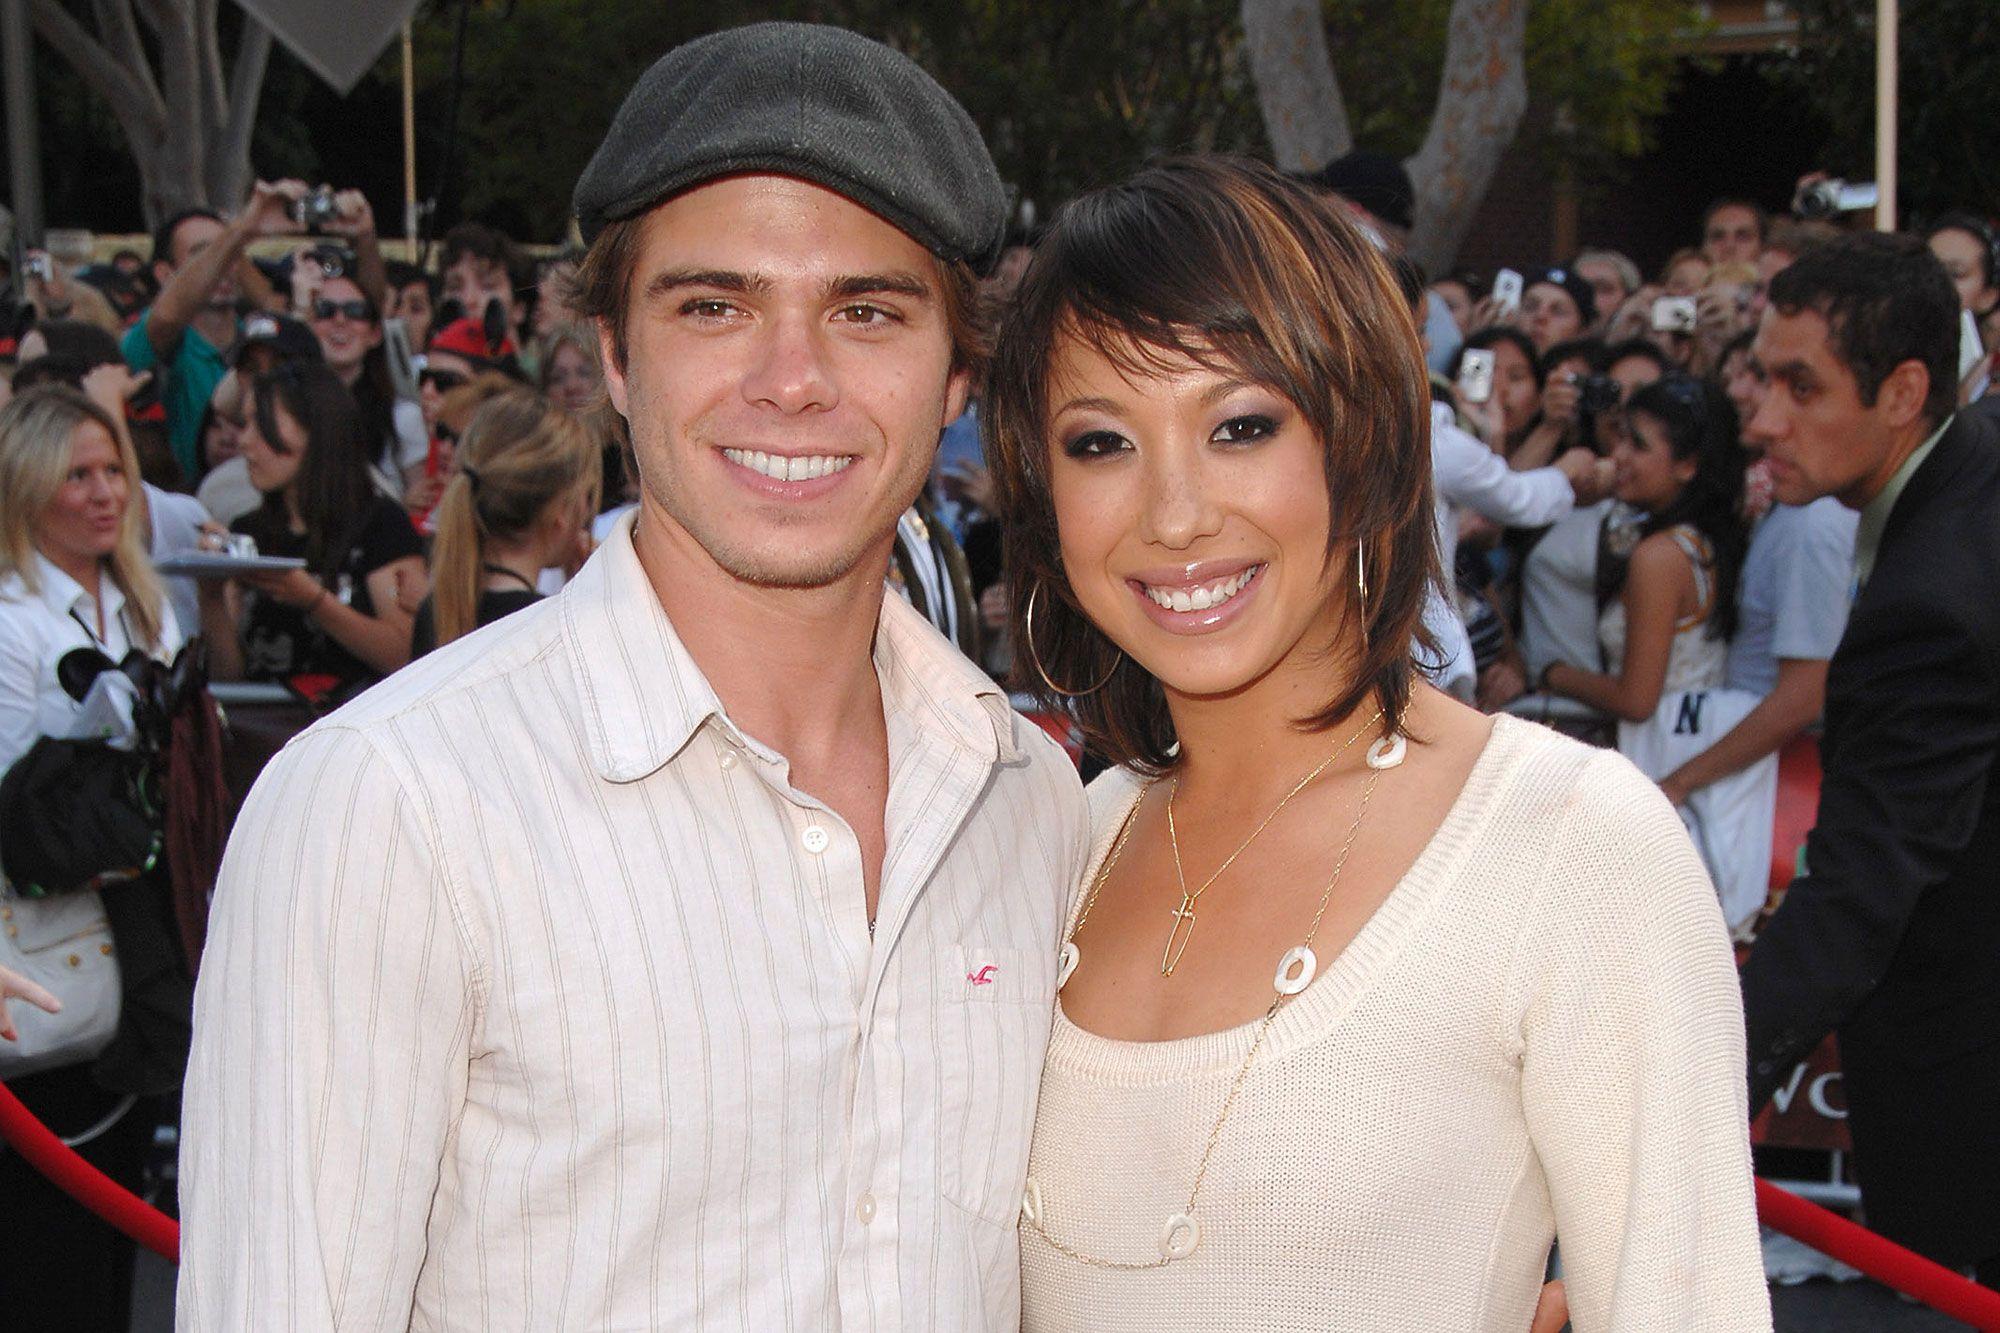 Dancing with the Stars' Cheryl Burke Is Courting Matthew Lawrence